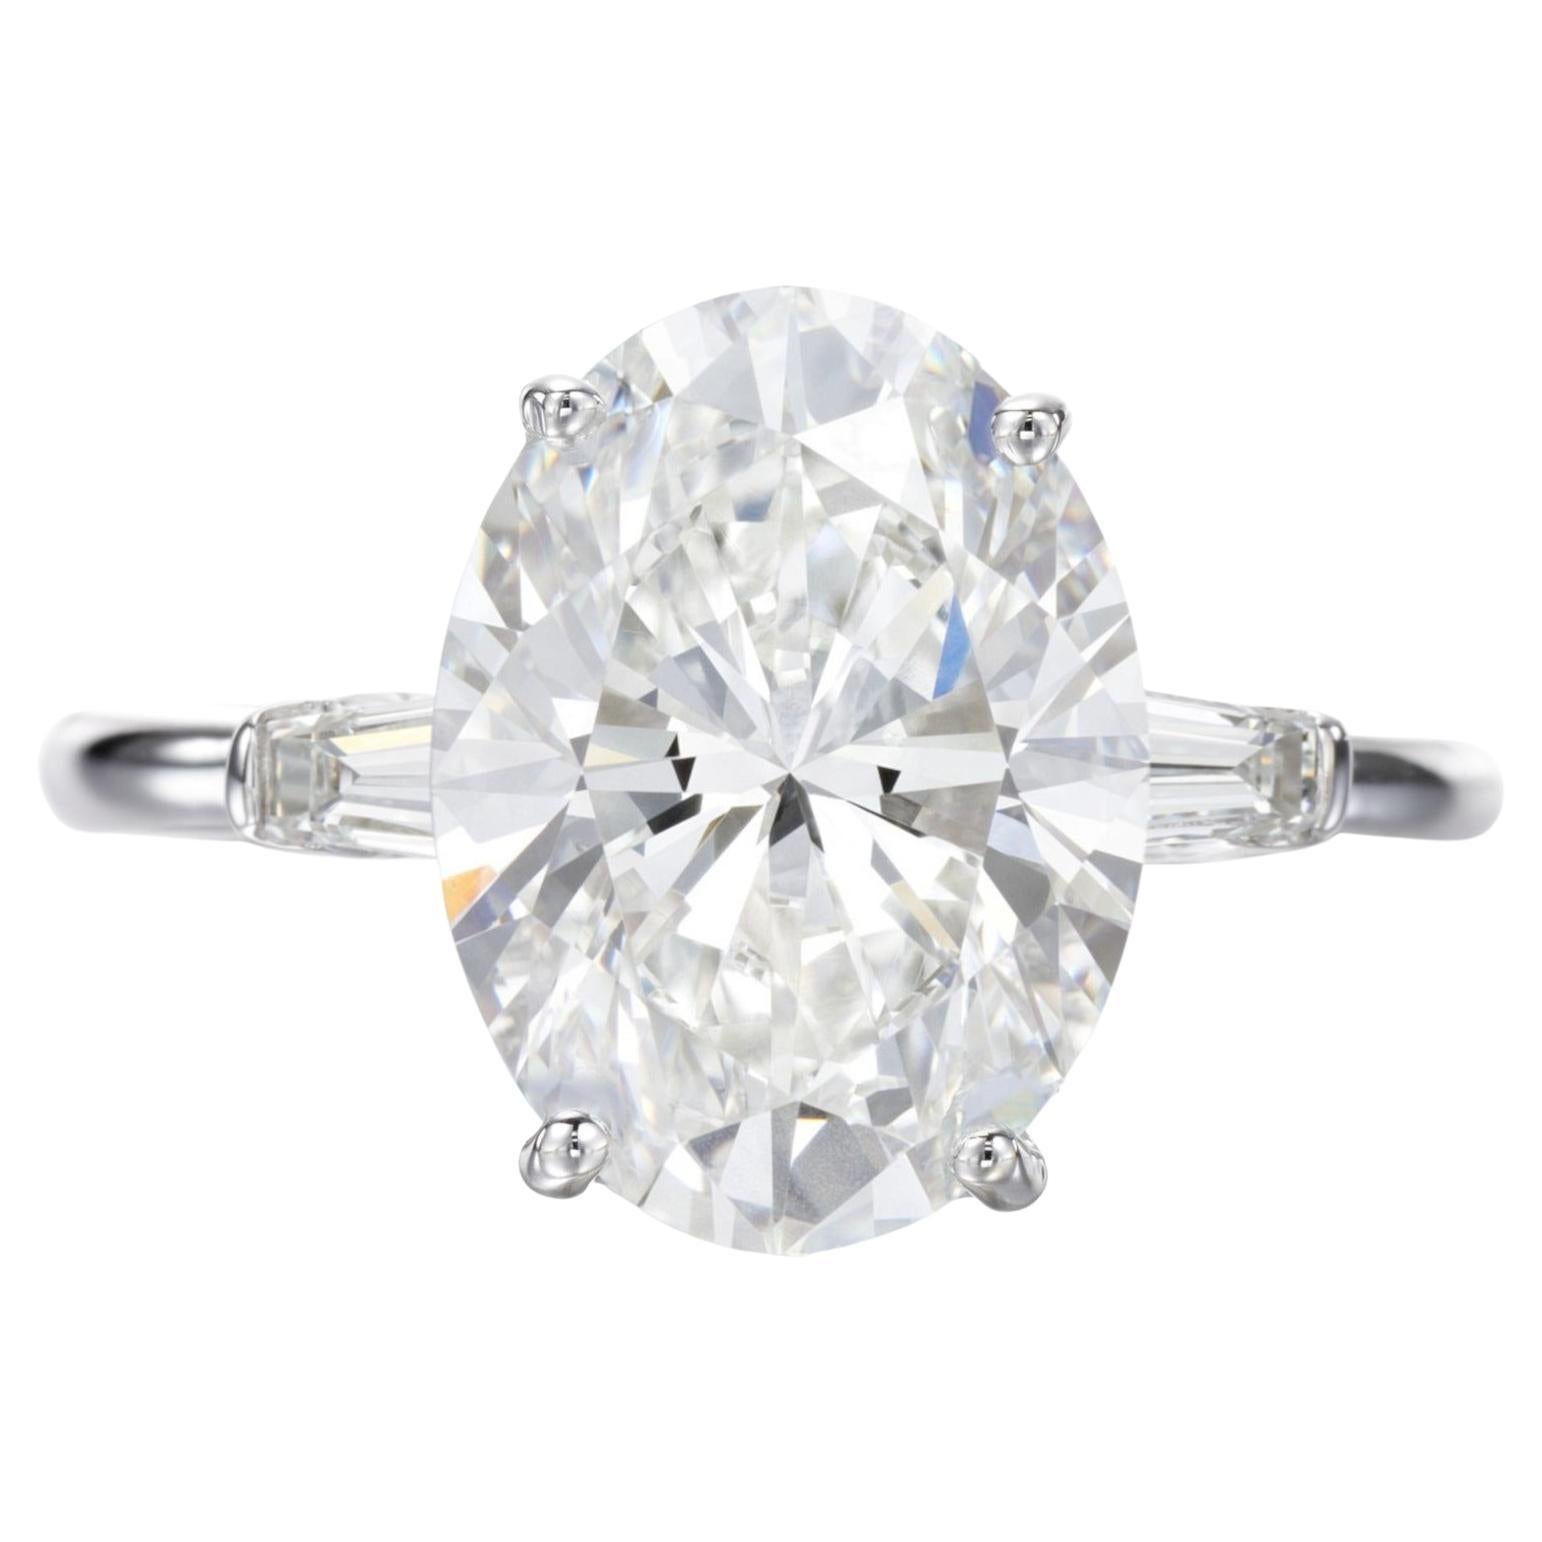 Exceptional GIA Certified 4.05 Carat Oval Diamond Ring